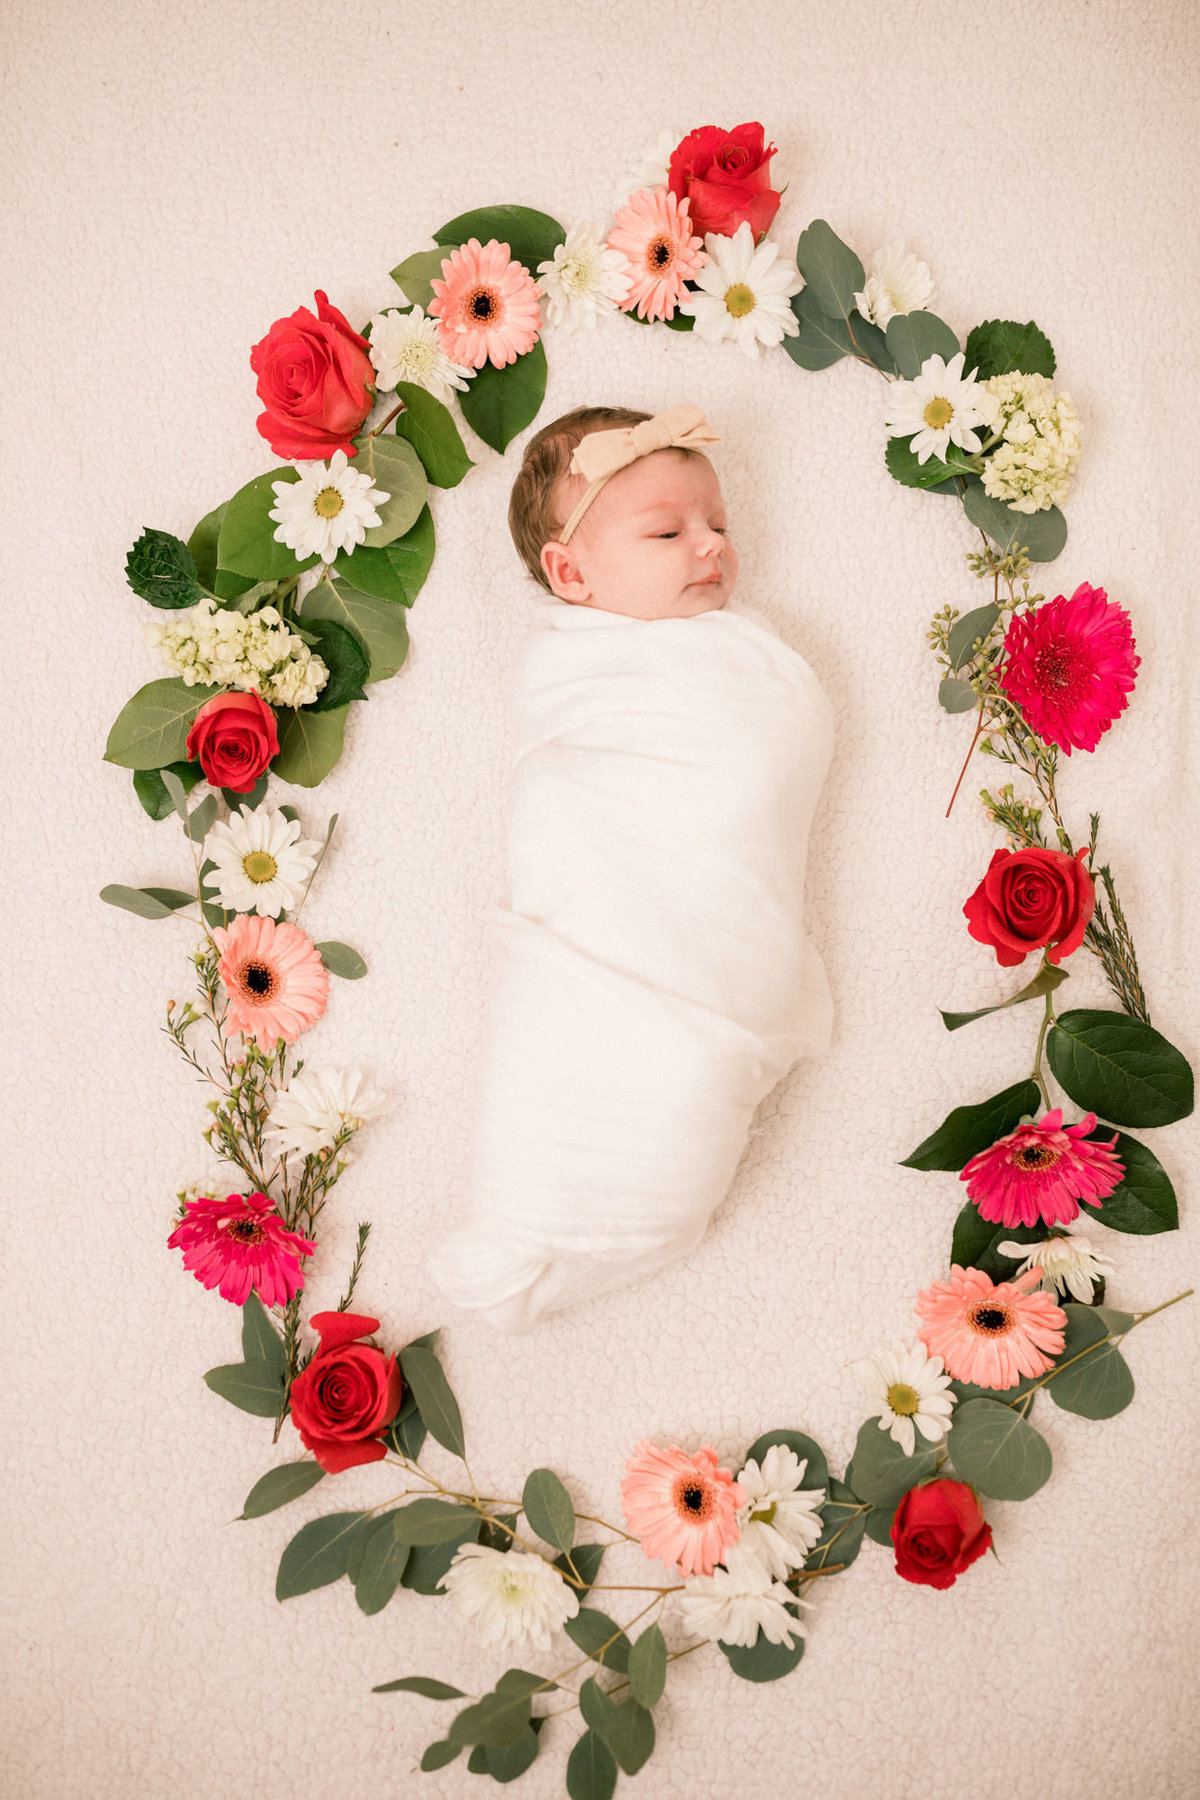 Baby lays in the middle of a ring of flowers